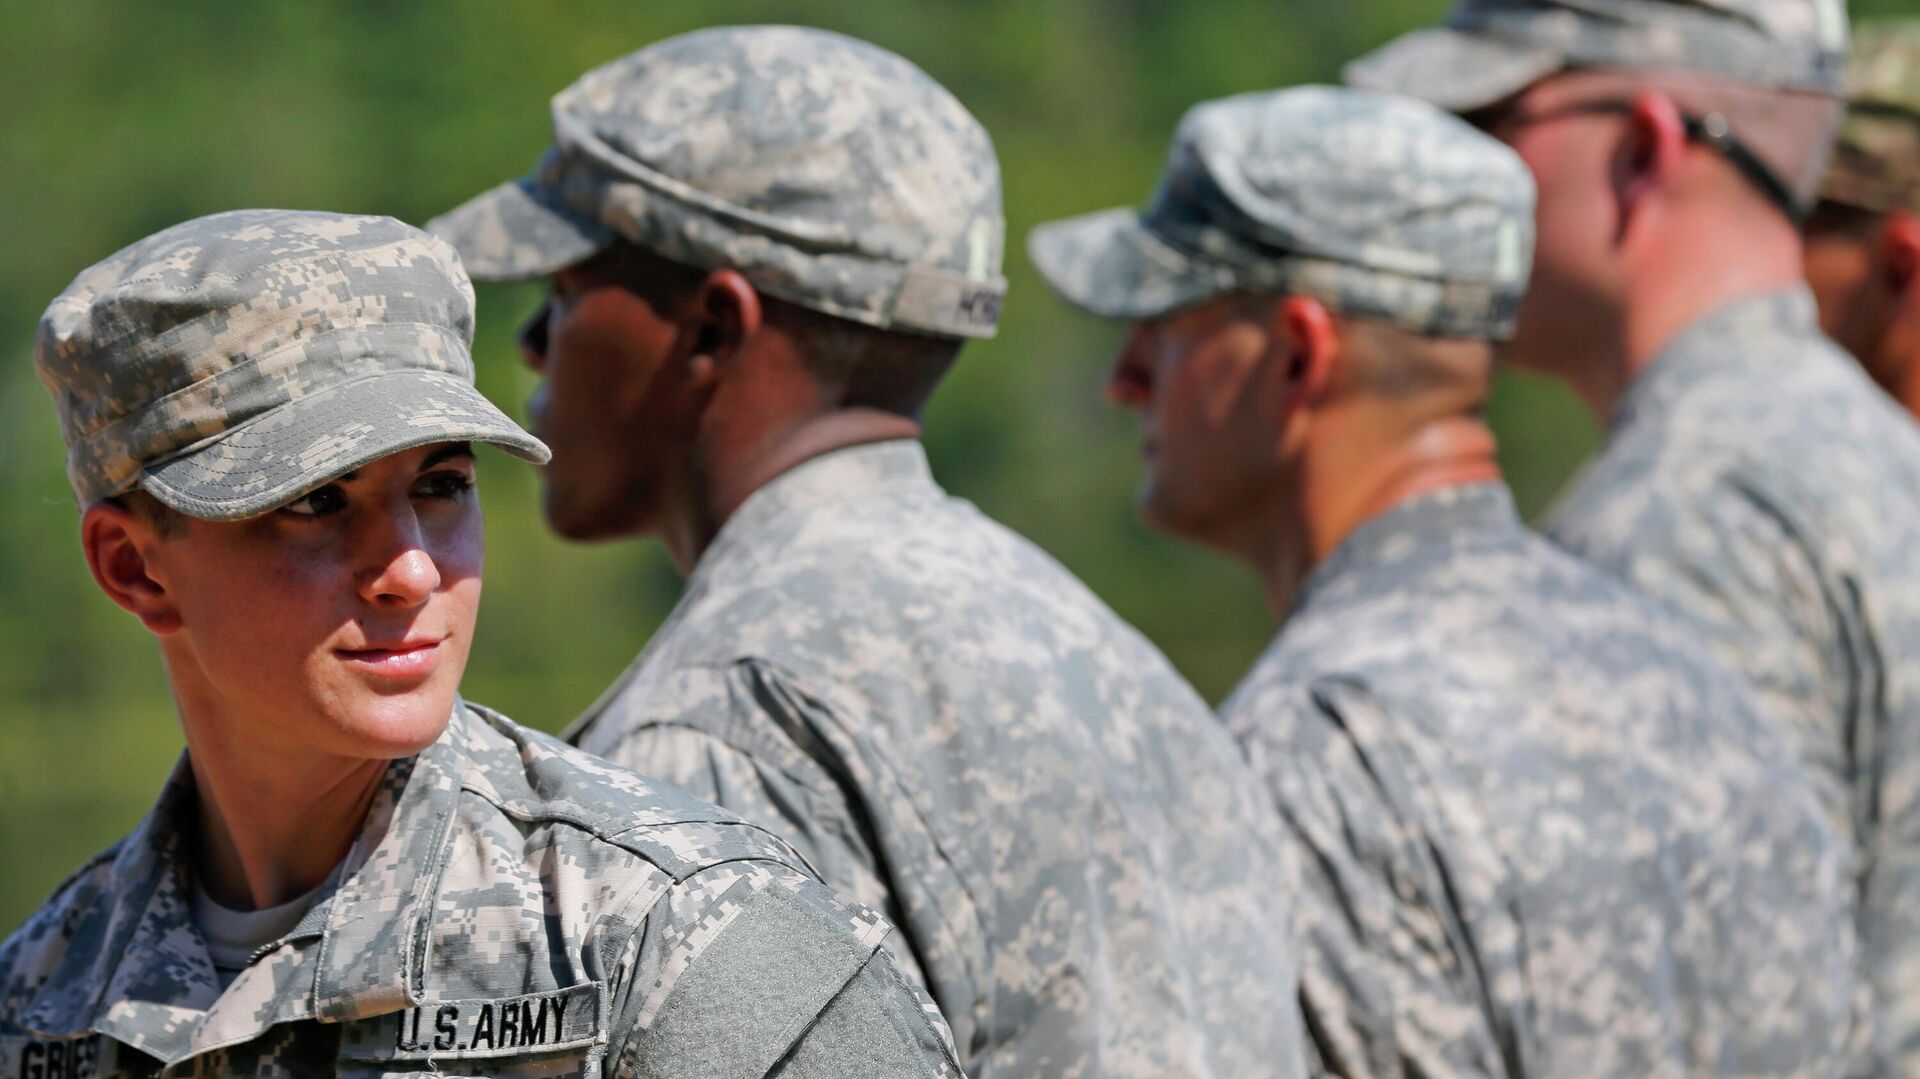  In this Aug. 21, 2015 file photo, U.S. Army Capt. Kristen Griest, left, of Orange, Conn., stands in formation during an Army Ranger School graduation ceremony at Fort Benning, Ga. - Sputnik International, 1920, 02.09.2022